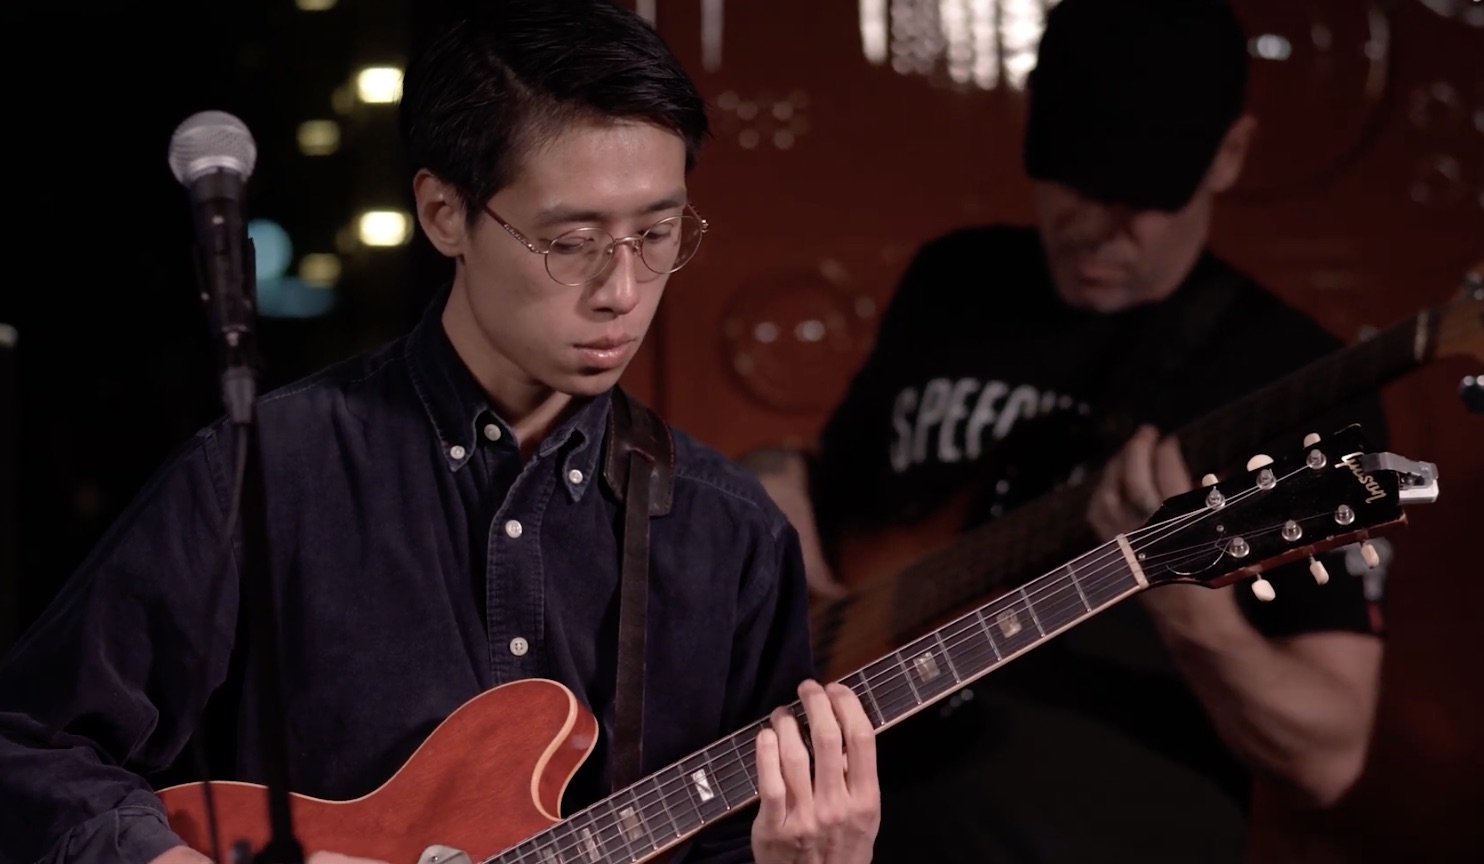 Jazz guitarist Tjoe will be performing at live house Lost Stars this weekend. Screengrab via YouTube.